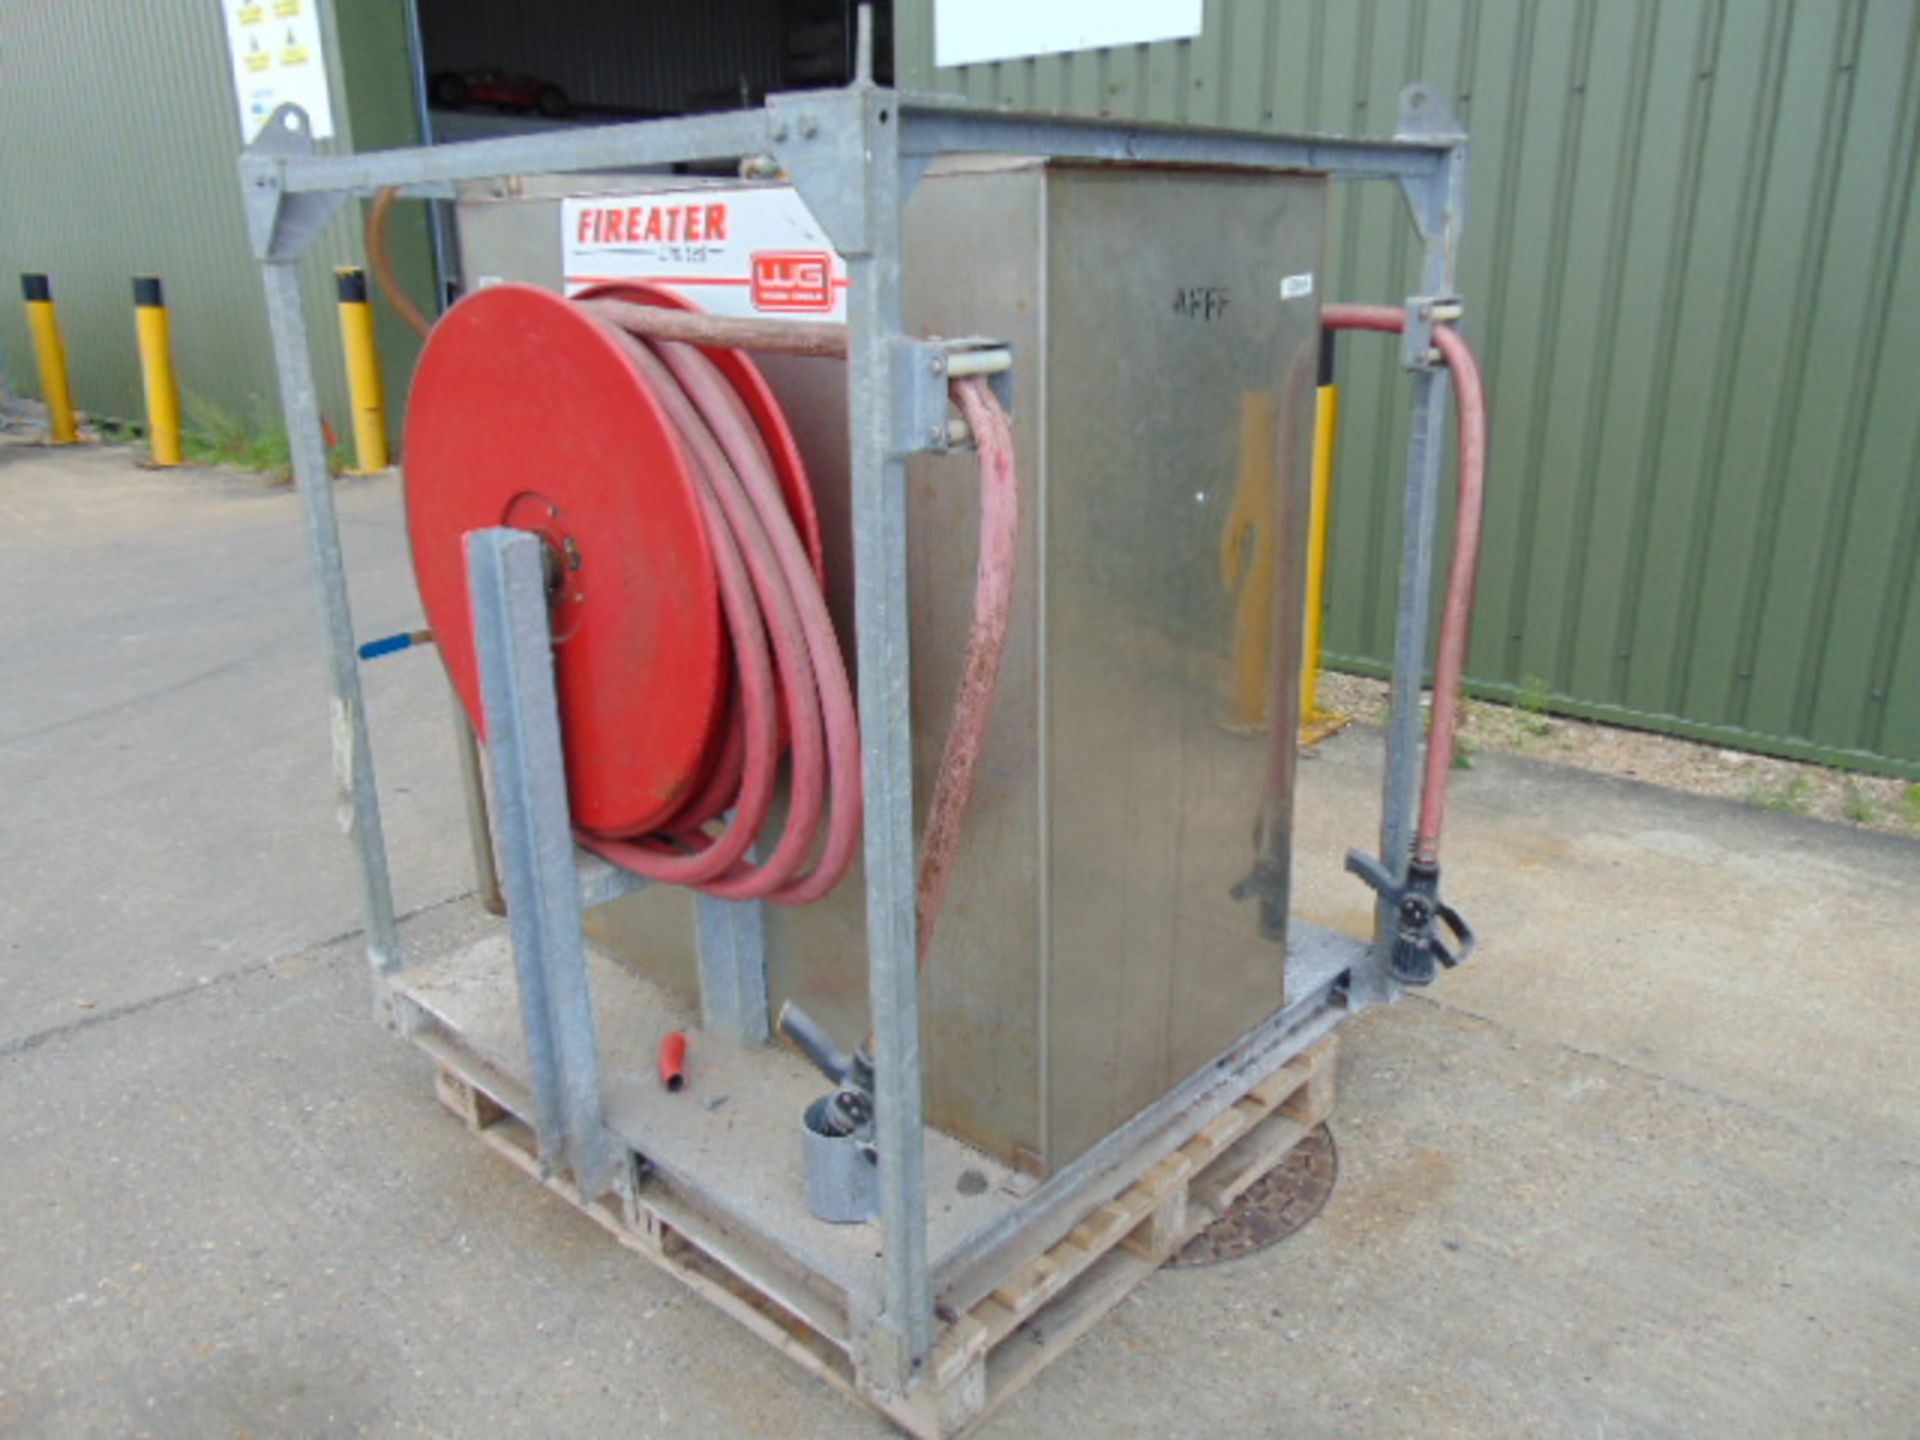 700L Fireater AFFF (Aqueous Film-Forming Foam) stainless steelTanks c/w 2 x 10m Fire Hose Reels. - Image 3 of 10